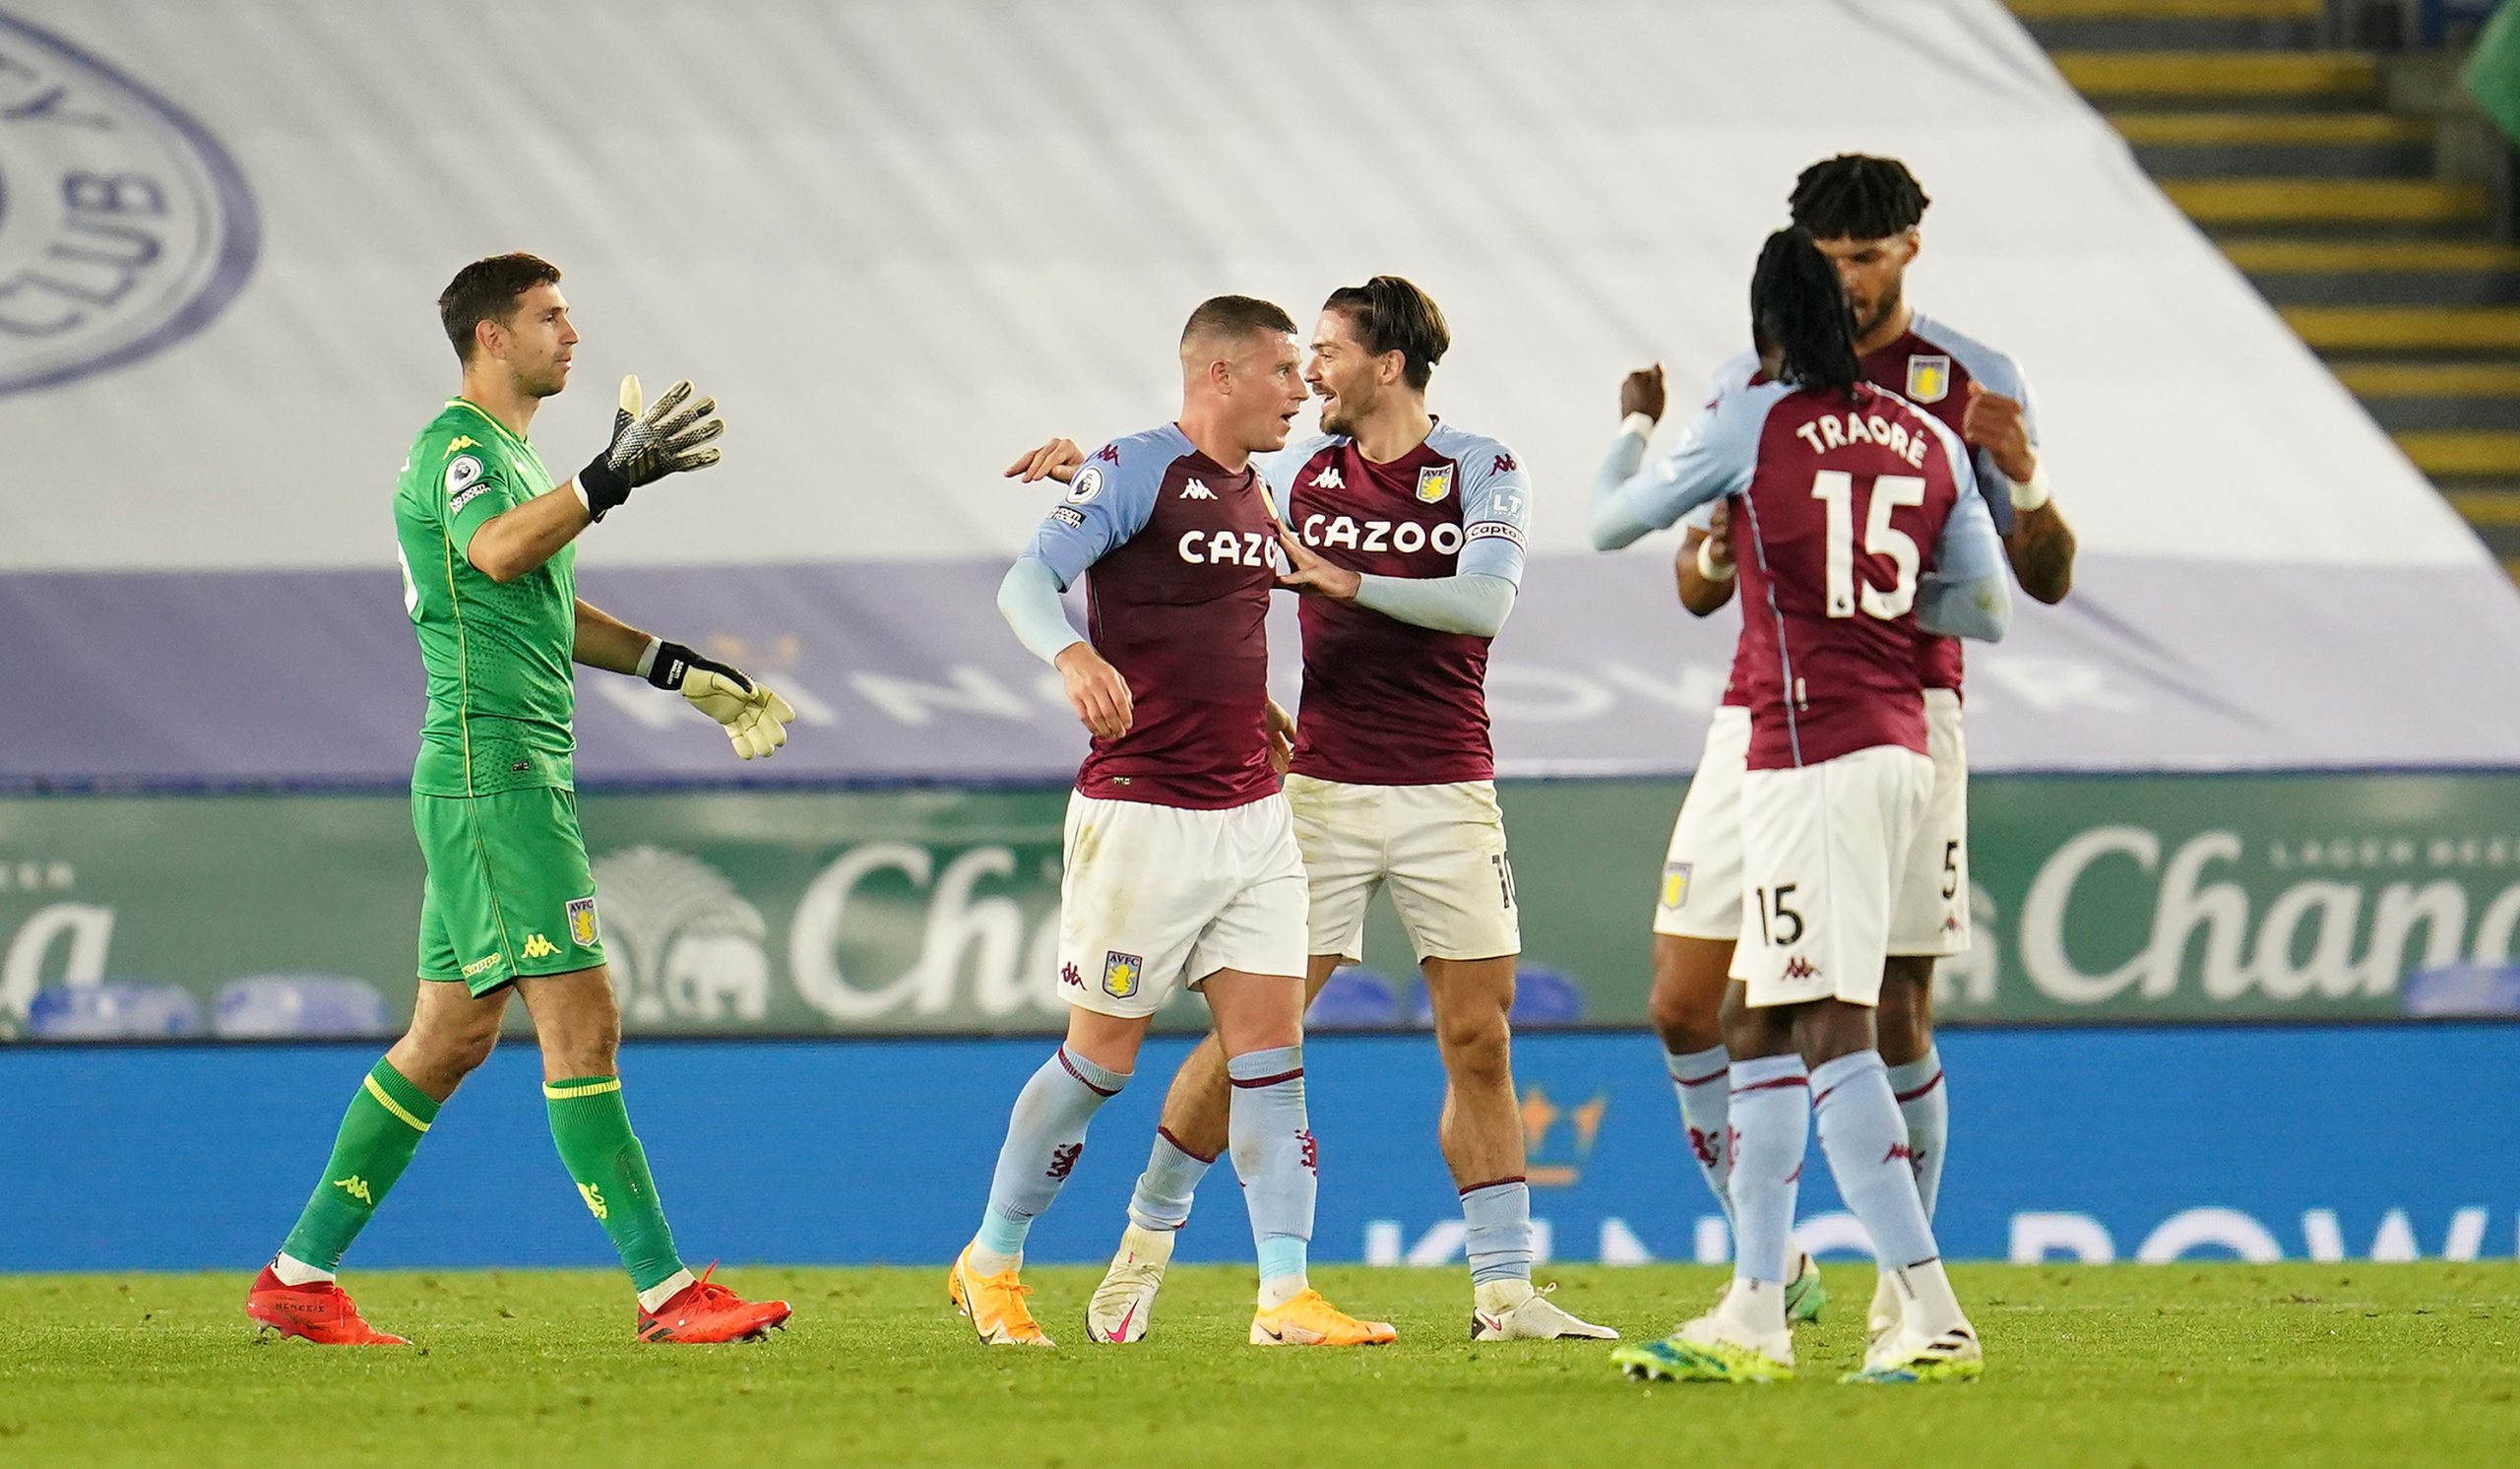 Ian Wright full of praise for Aston Villa keeper Martinez who is celebrating with his teammates in the picture)